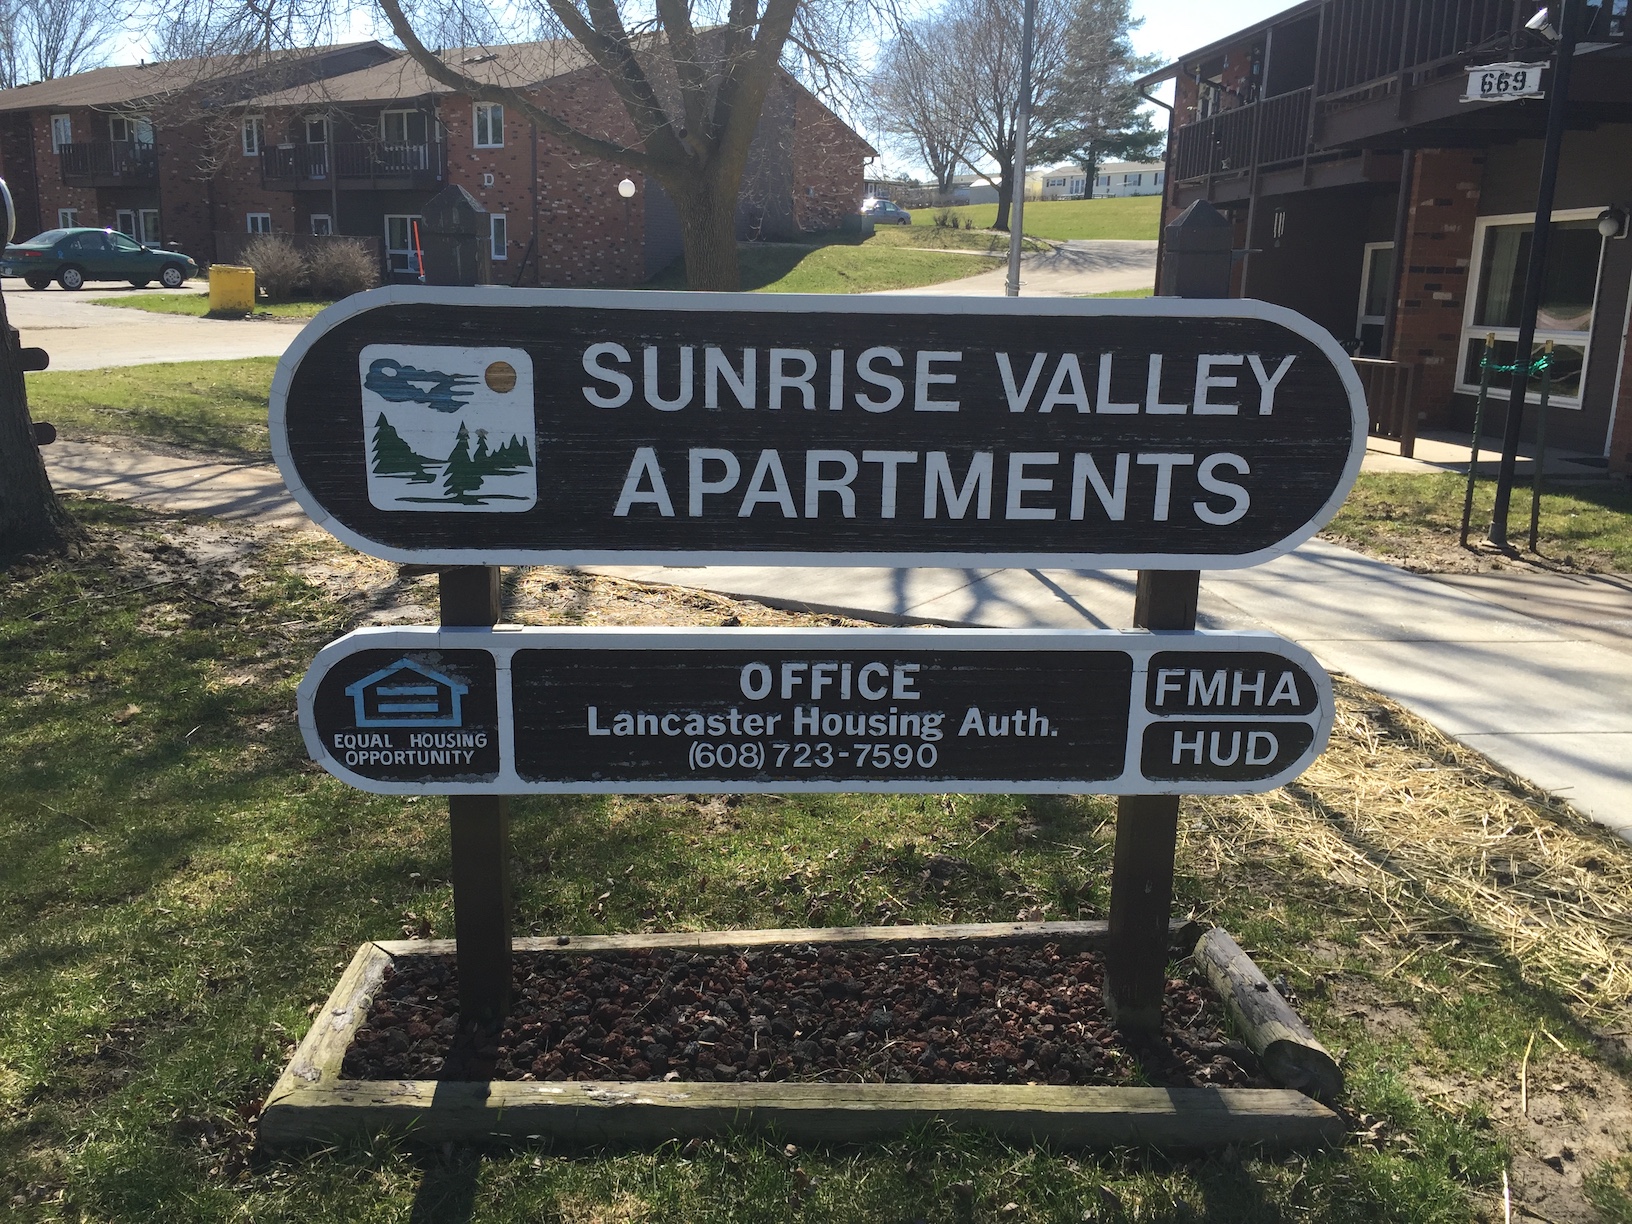 Sunrise Valley Apartments in Lancaster, Wisconsin